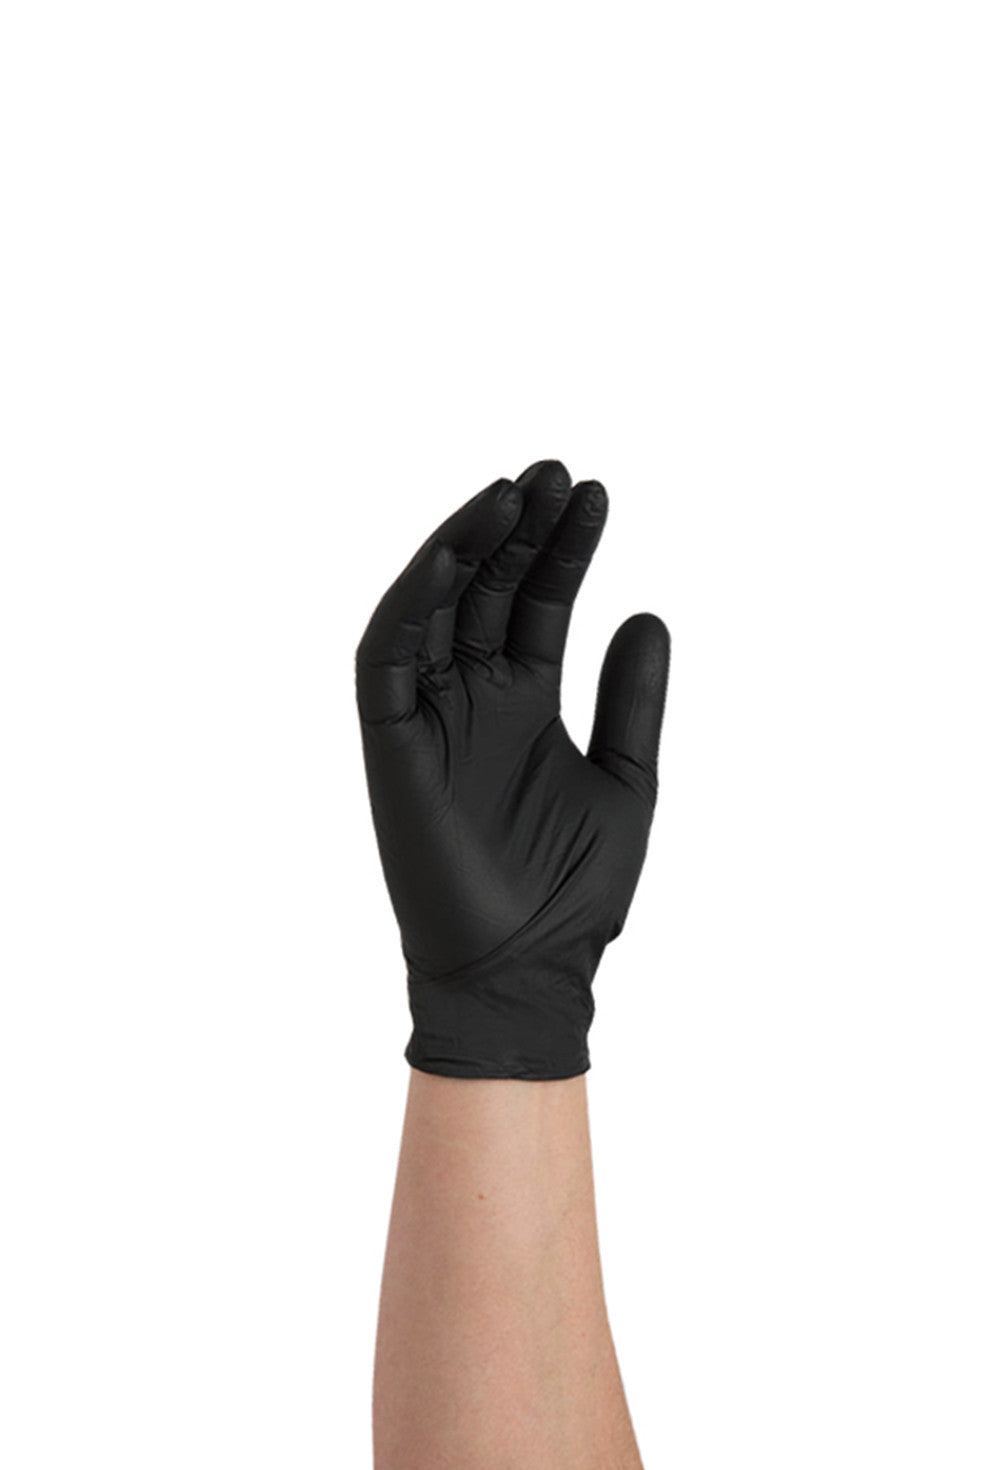 Why Do Disposable Gloves Smell?